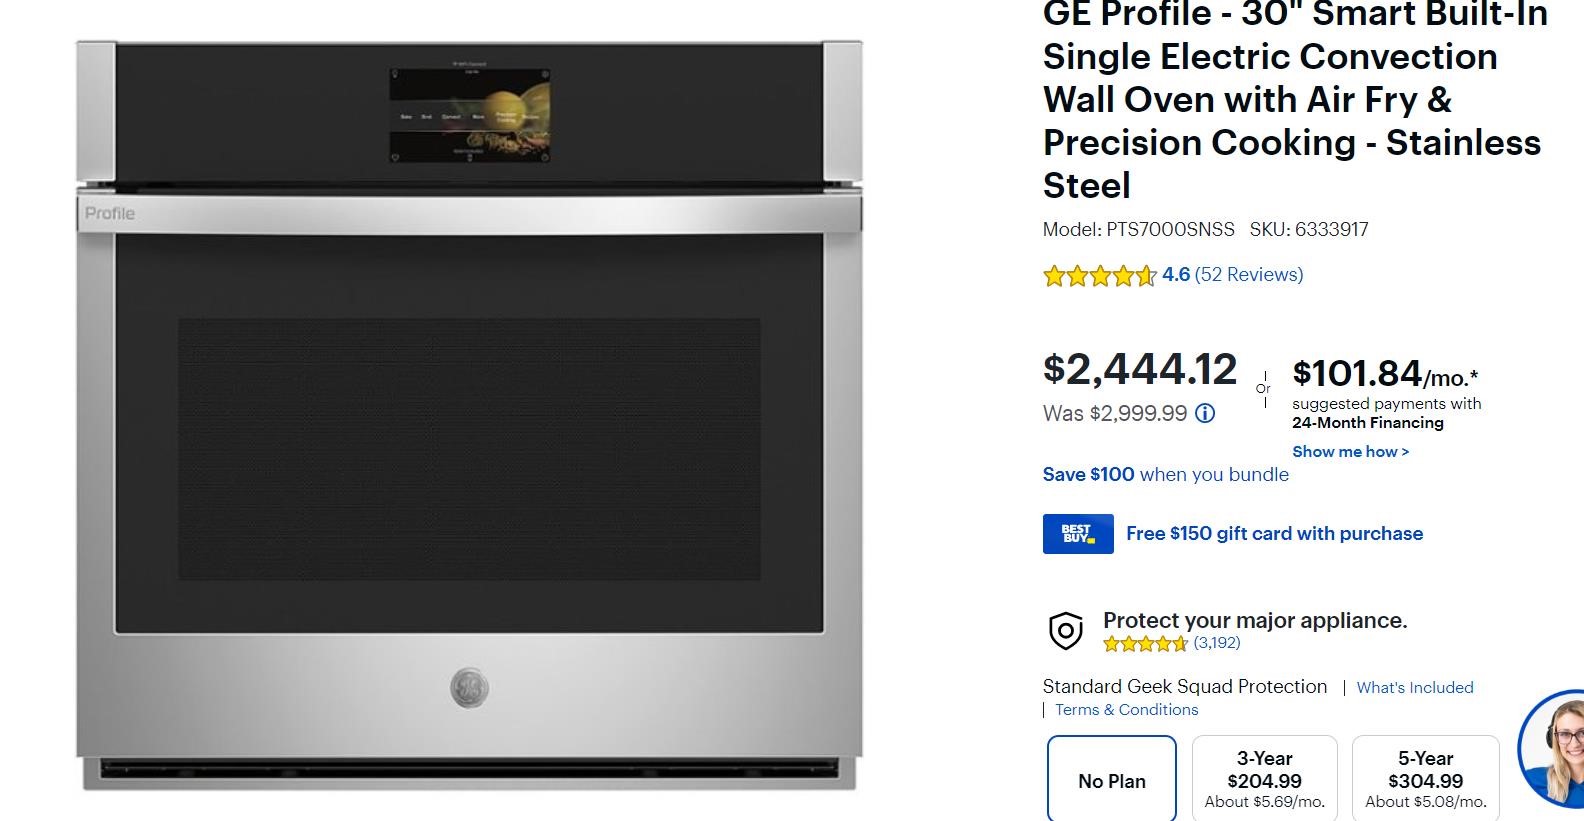 GE Profile - 30" Smart Built-In Single Wall Oven